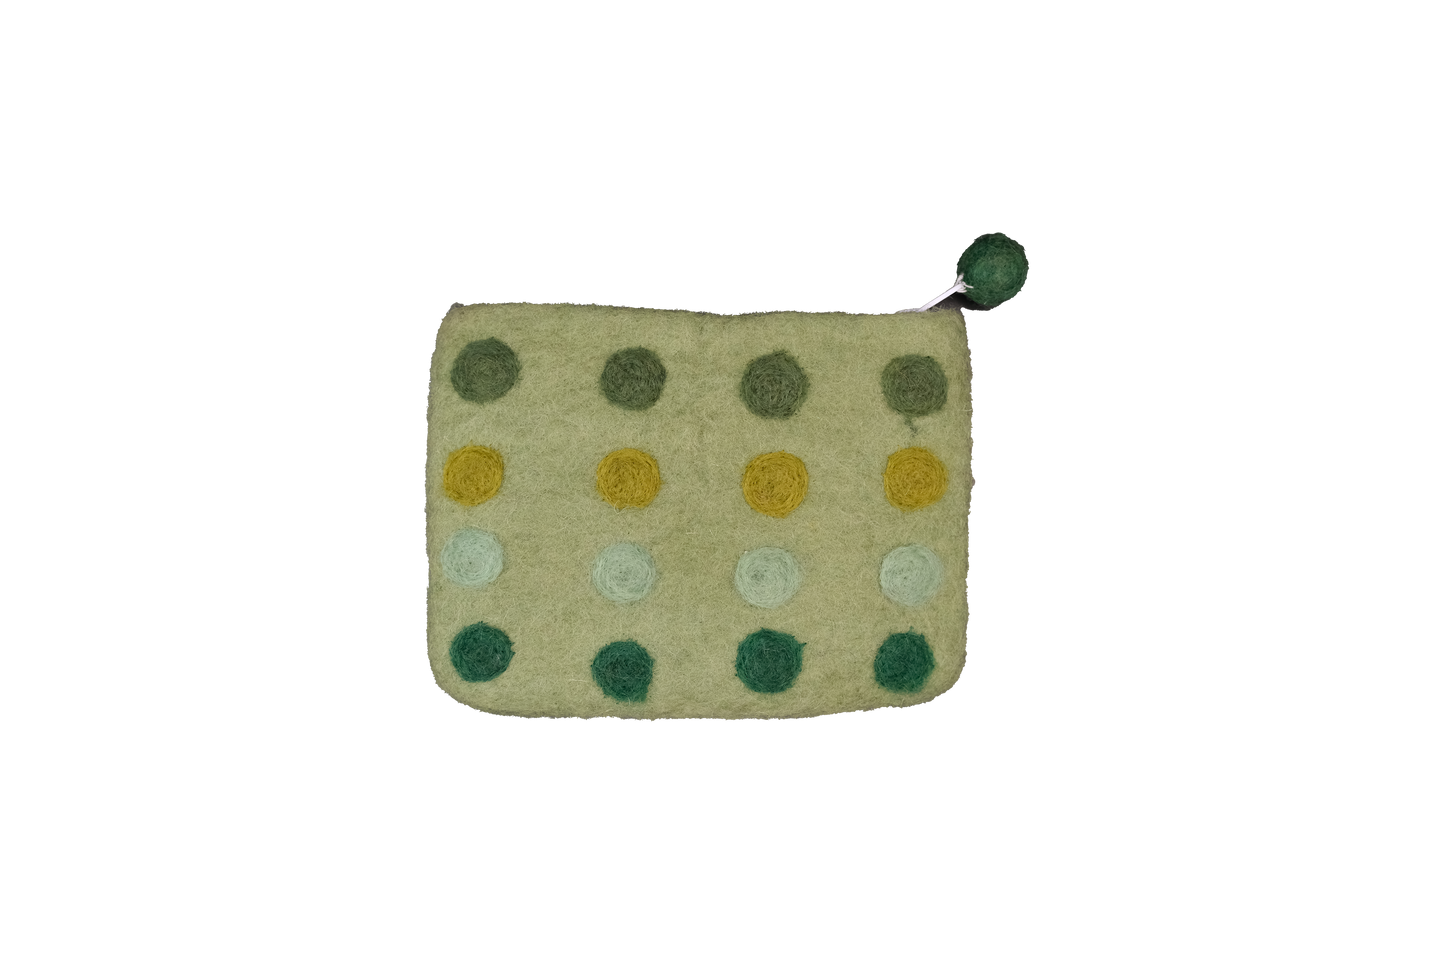 This Global Groove Life, handmade, ethical, fair trade, eco-friendly, sustainable, green colored, New Zealand wool zipper coin purse was created by artisans in Kathmandu Nepal and is adorned with a polka dot motif and a pom pom zipper pull.